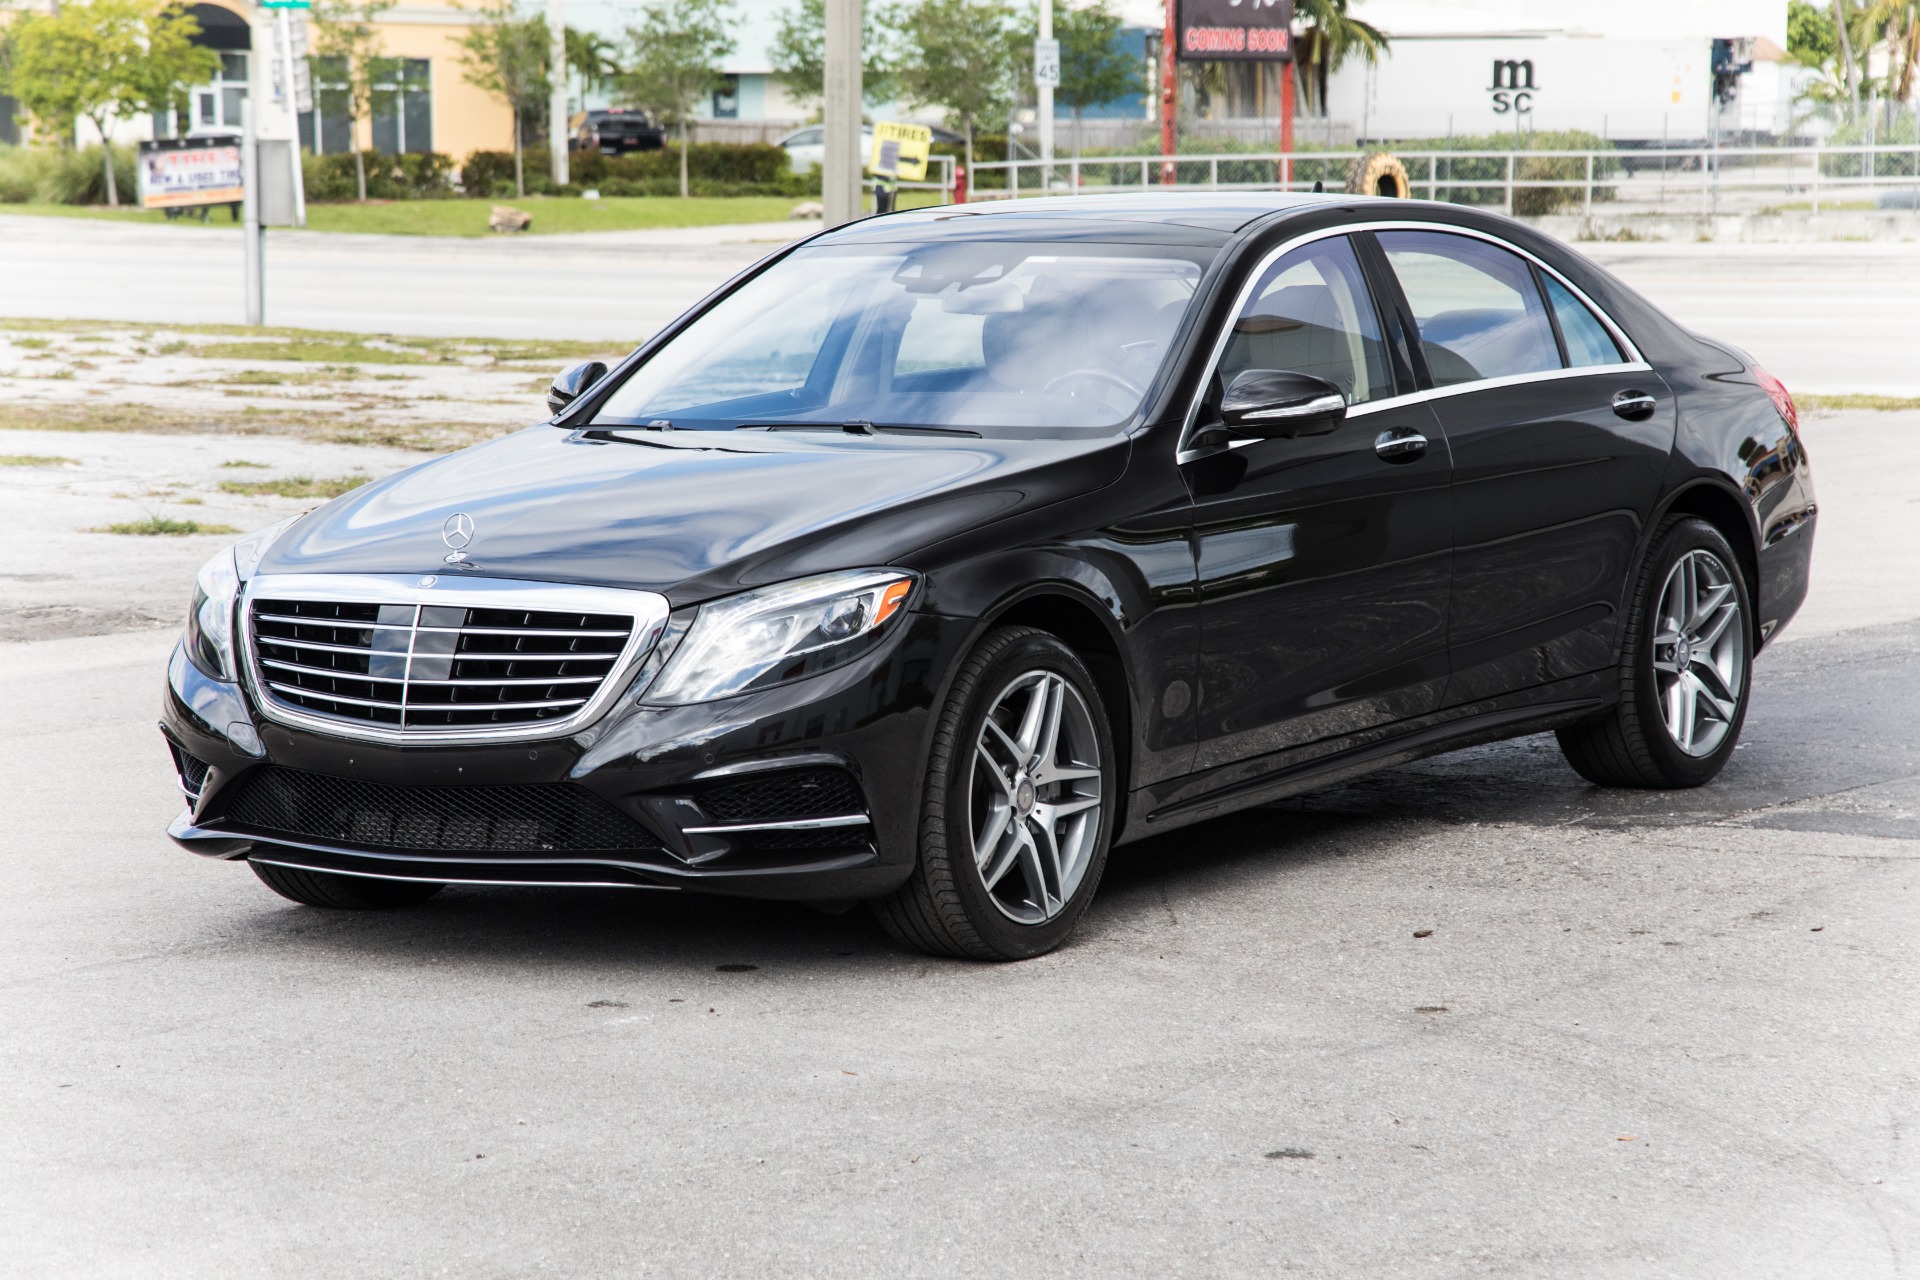 Used 2015 MercedesBenz SClass S 550 4MATIC For Sale